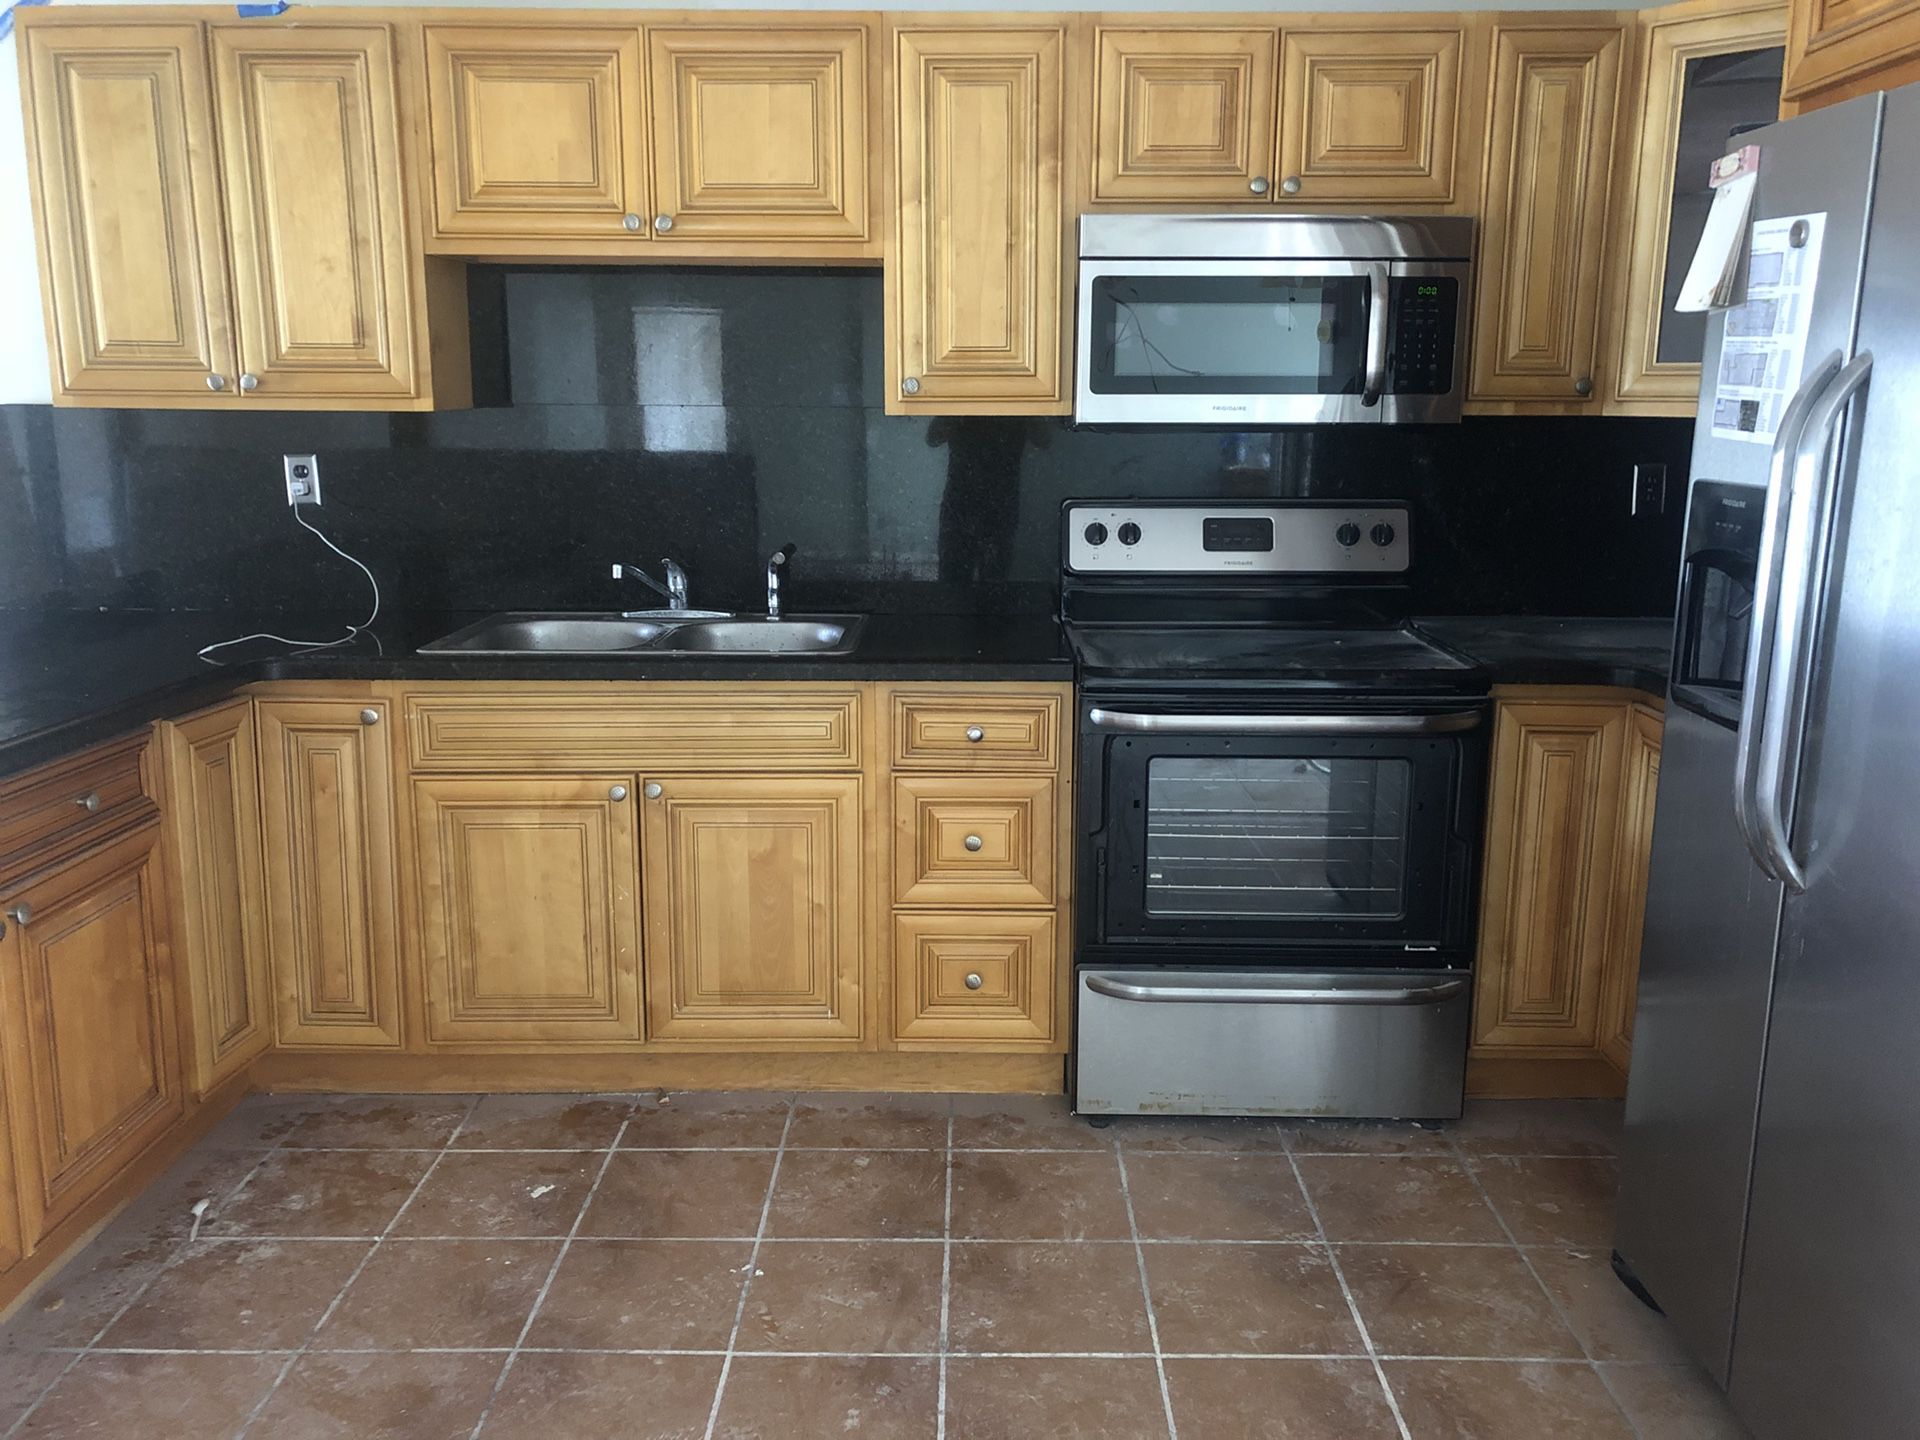 All wood used kitchen cabinets and marble NO APPLIANCES